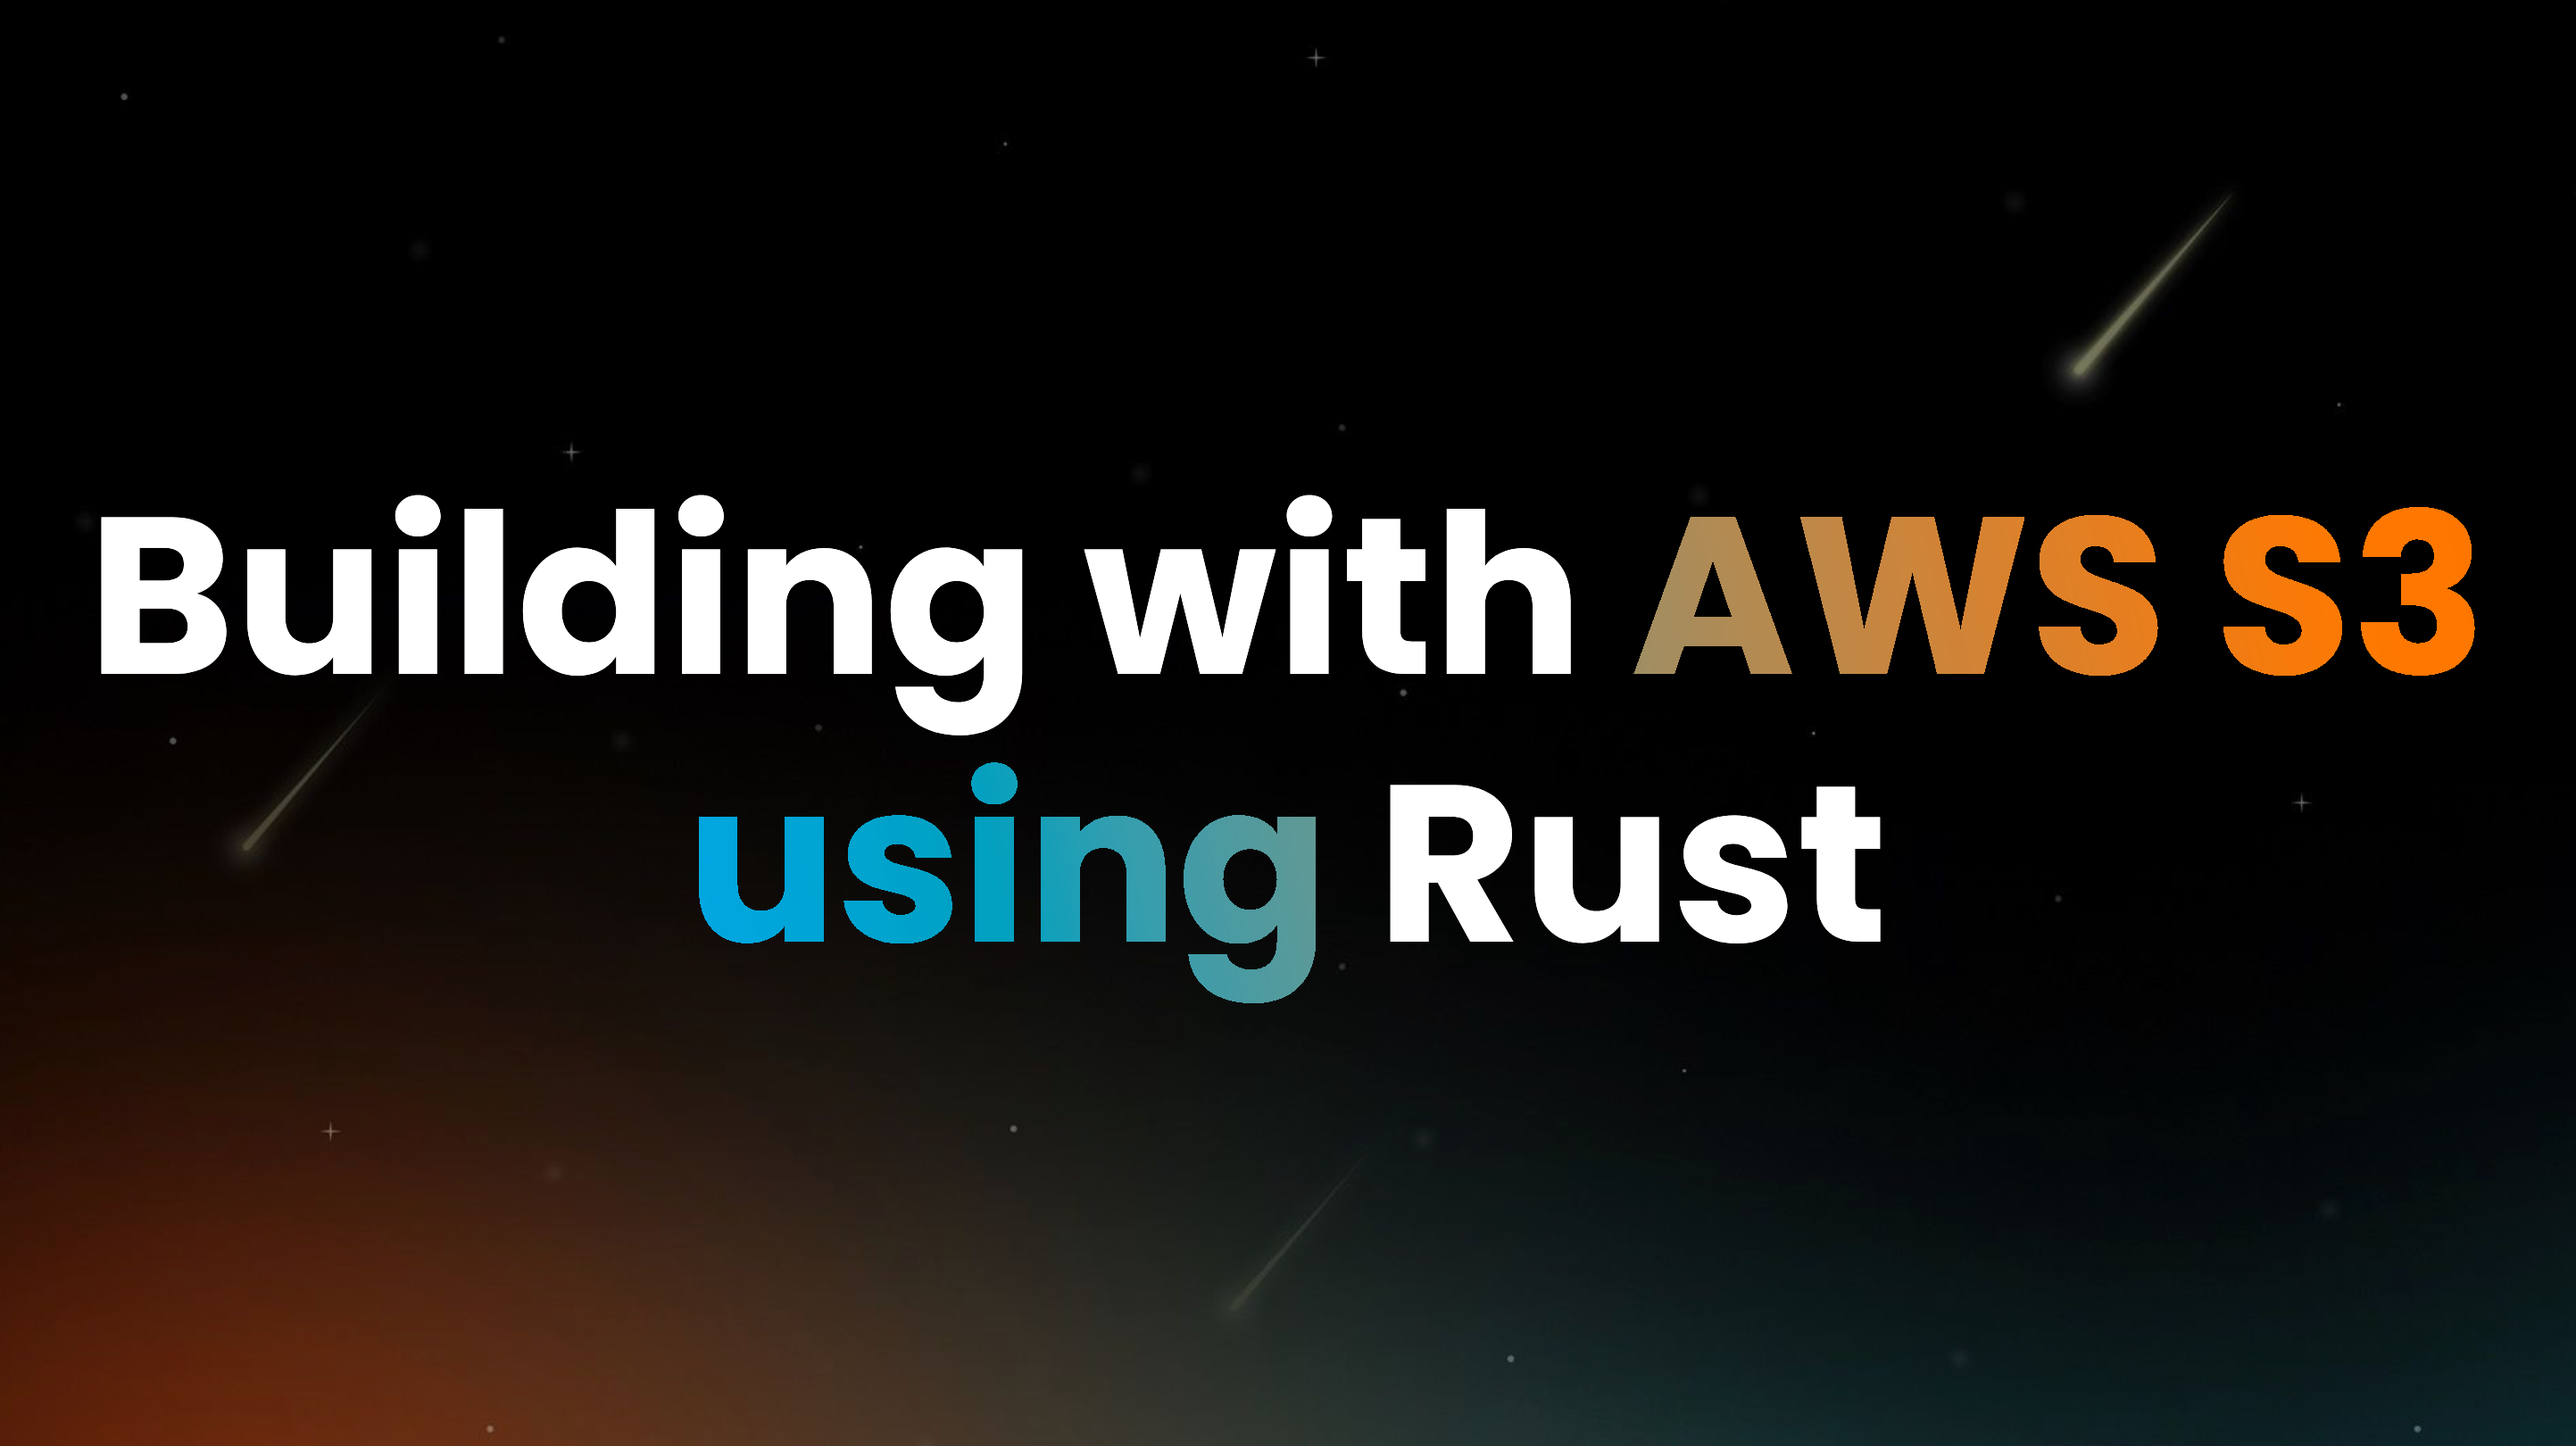 Building with AWS S3 using Rust